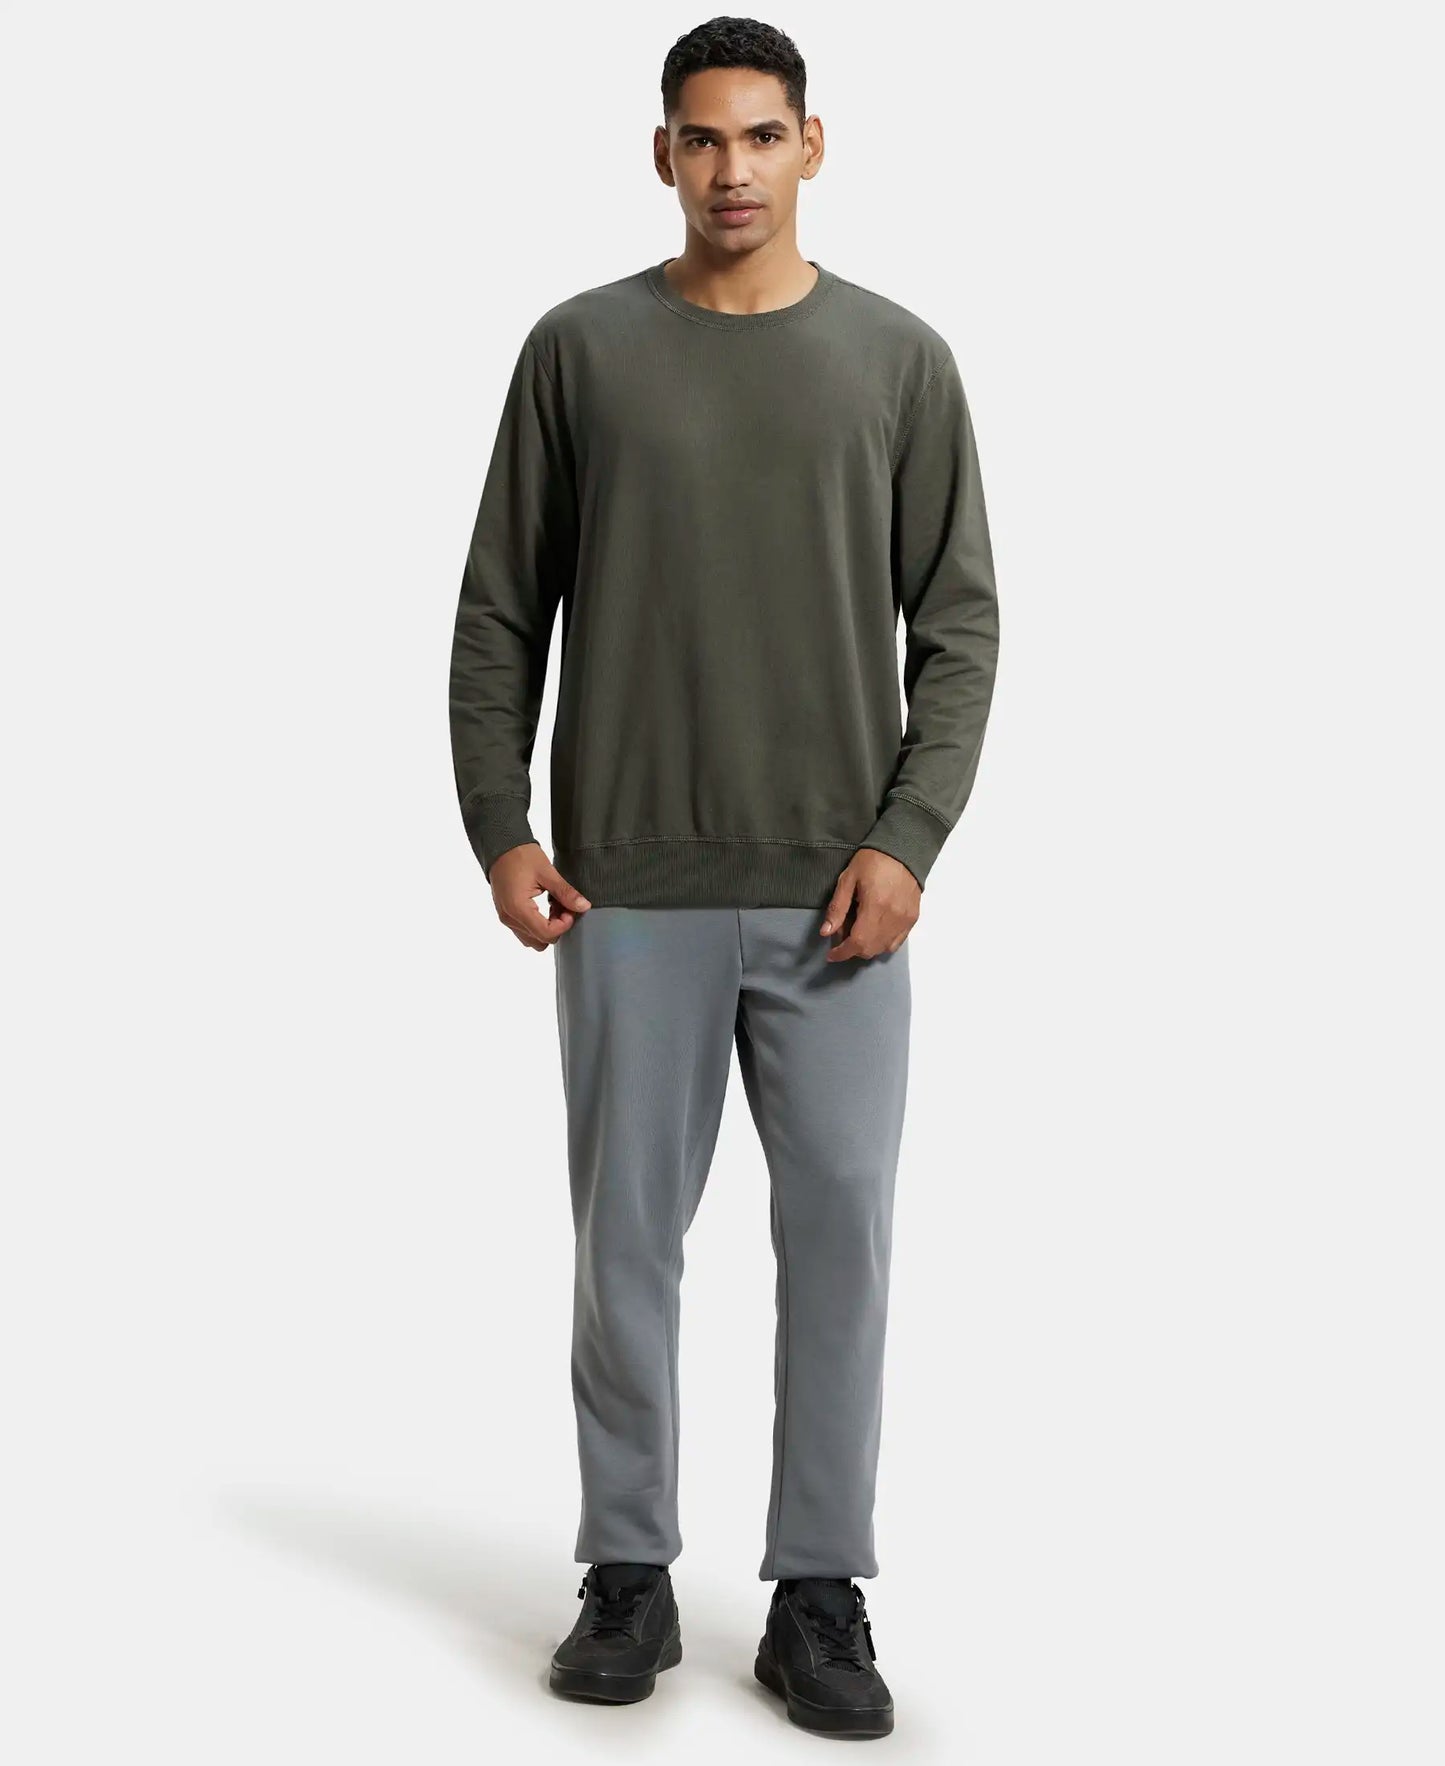 Super Combed Cotton French Terry Solid Sweatshirt with Ribbed Cuffs - Deep Olive-4